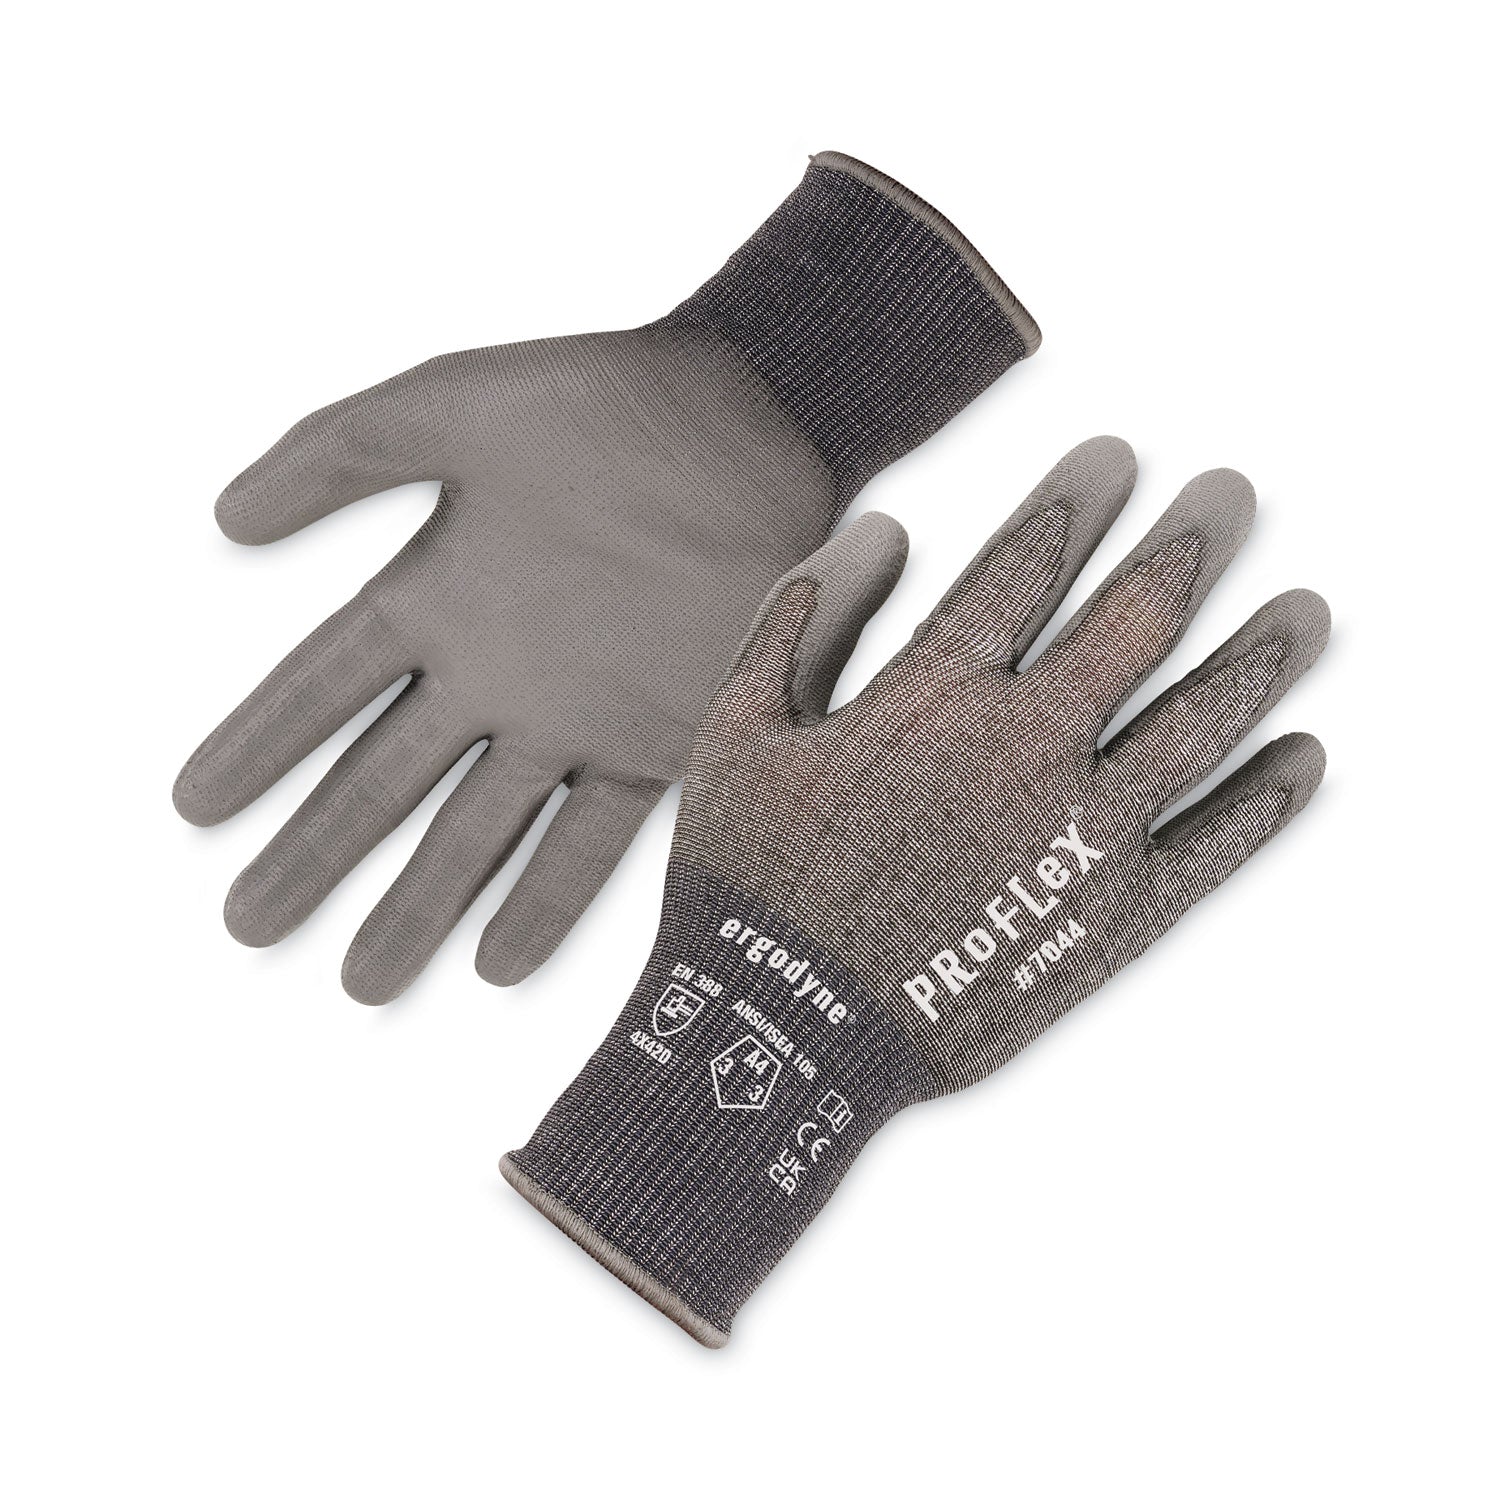 proflex-7044-ansi-a4-pu-coated-cr-gloves-gray-x-large-12-pairs-pack-ships-in-1-3-business-days_ego10485 - 1